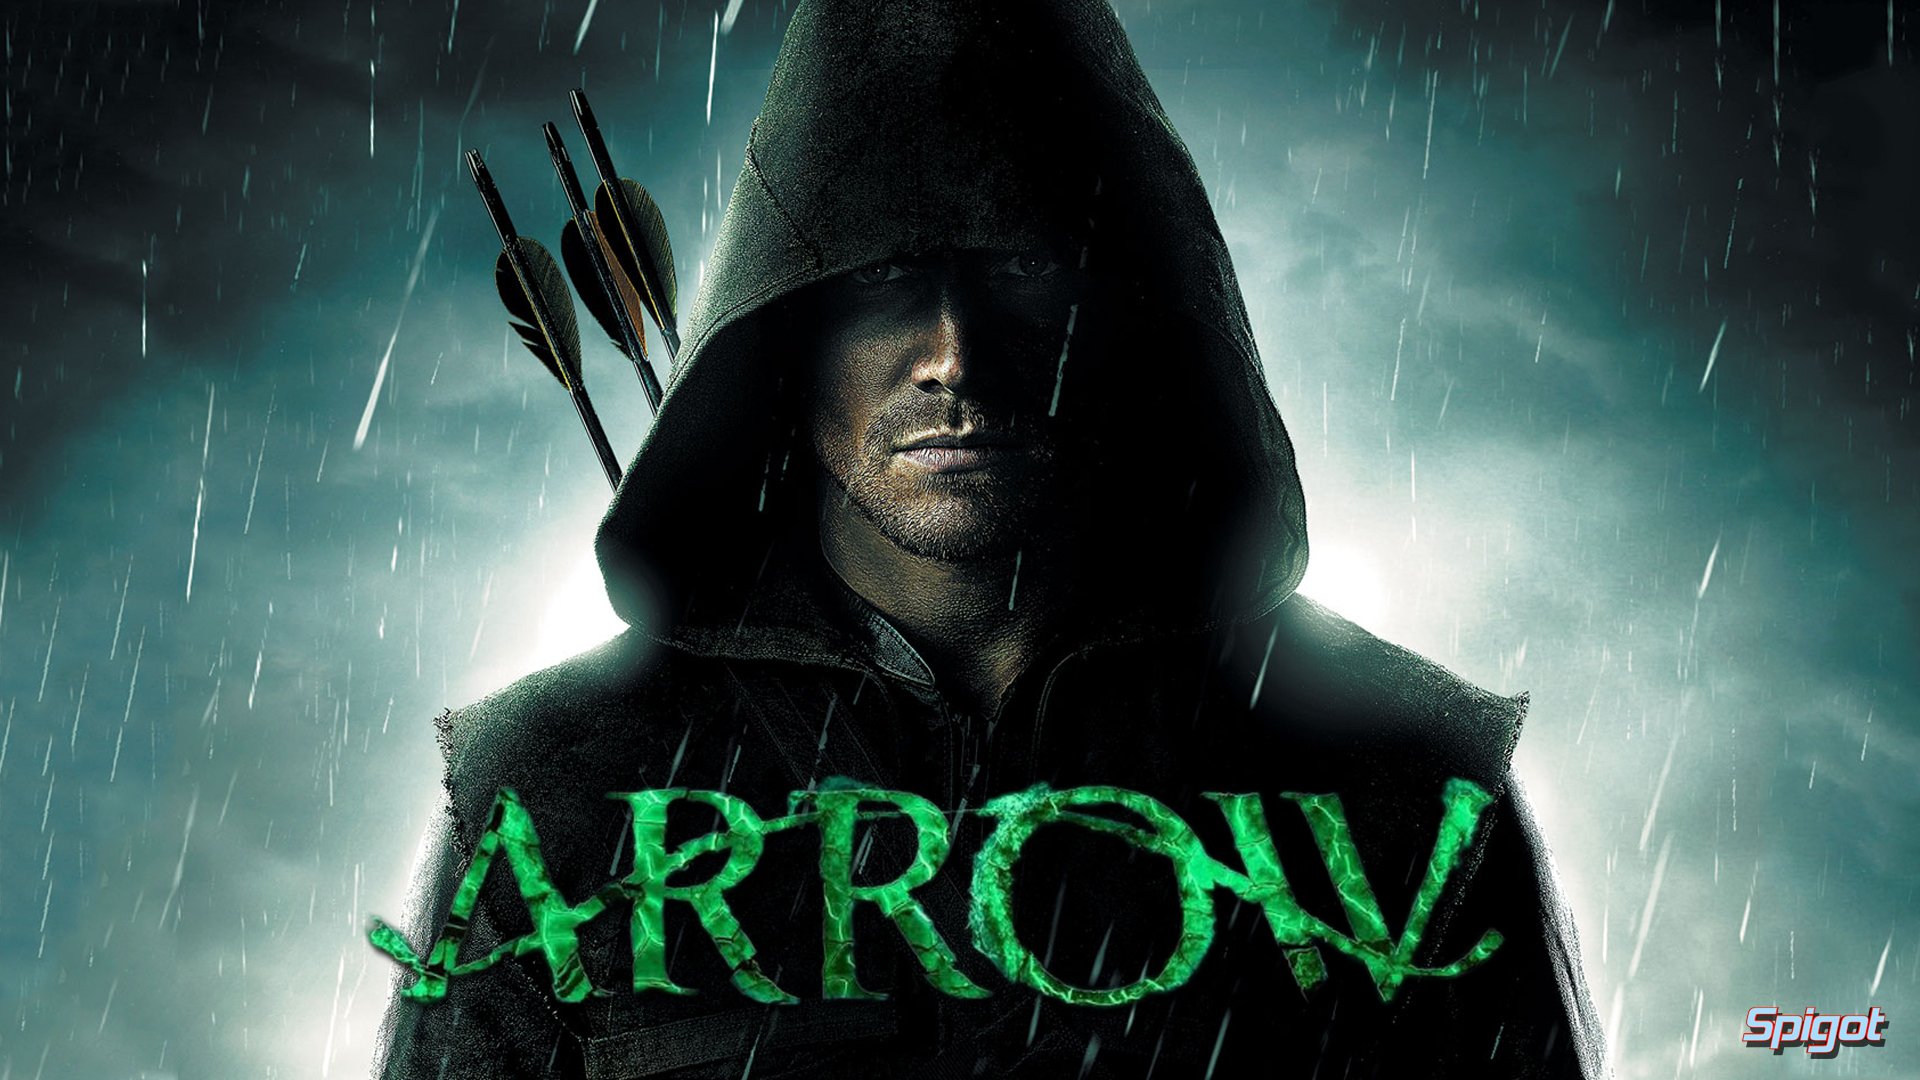 ARROW green action adventure crime television series poster warrior